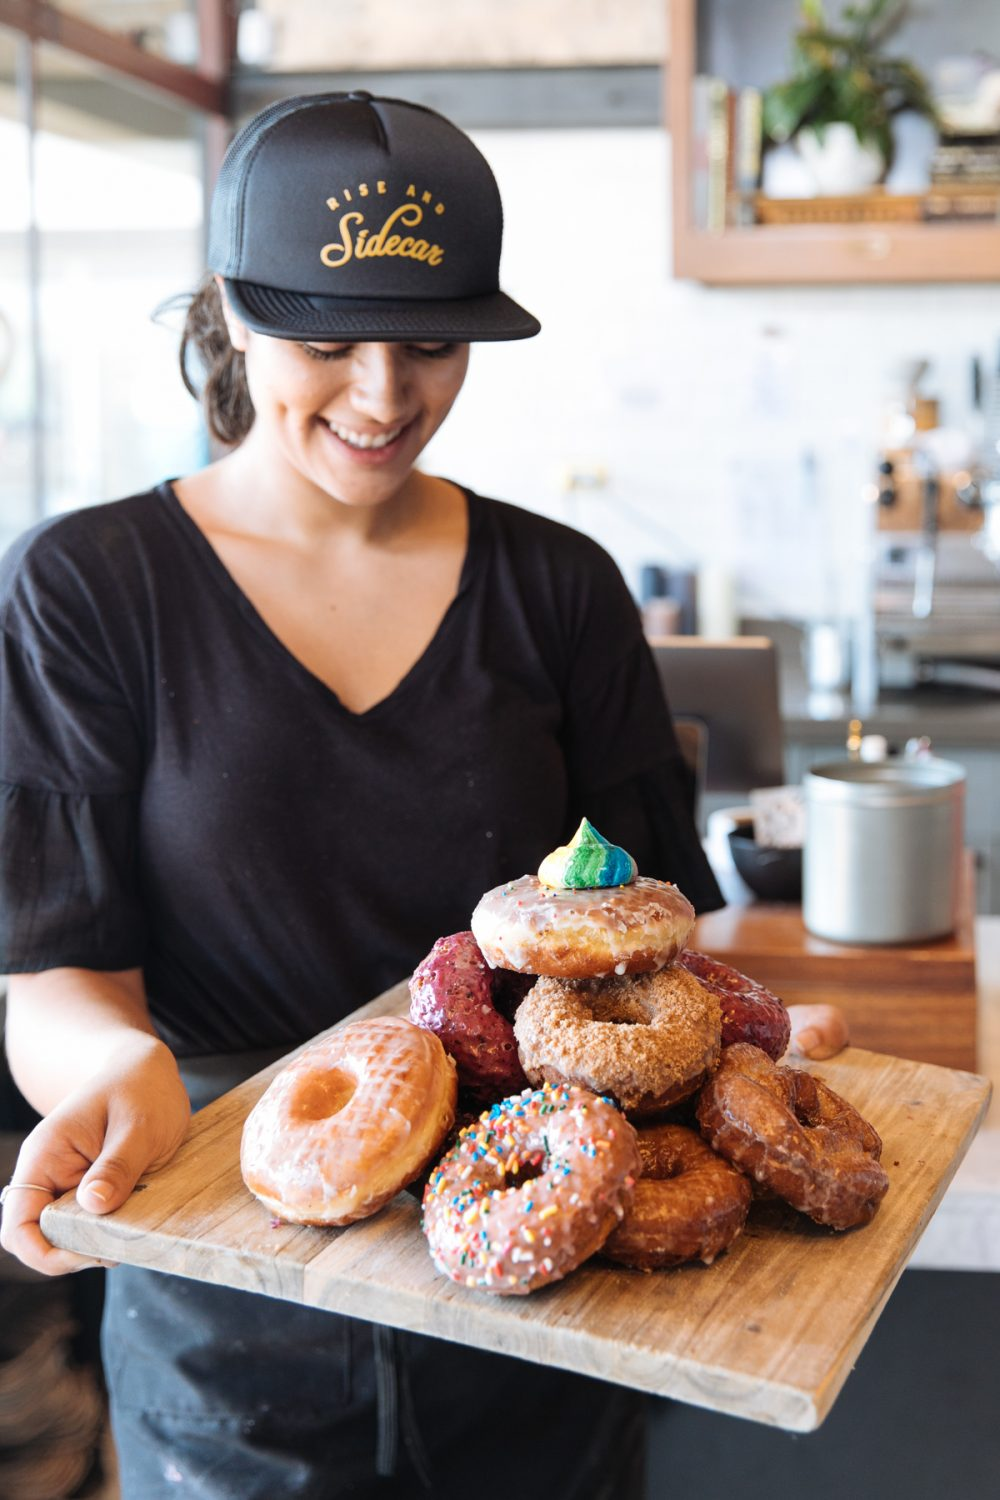 Woman with hat holding a plate of donuts at Sidecar Doughnuts in Santa Monica